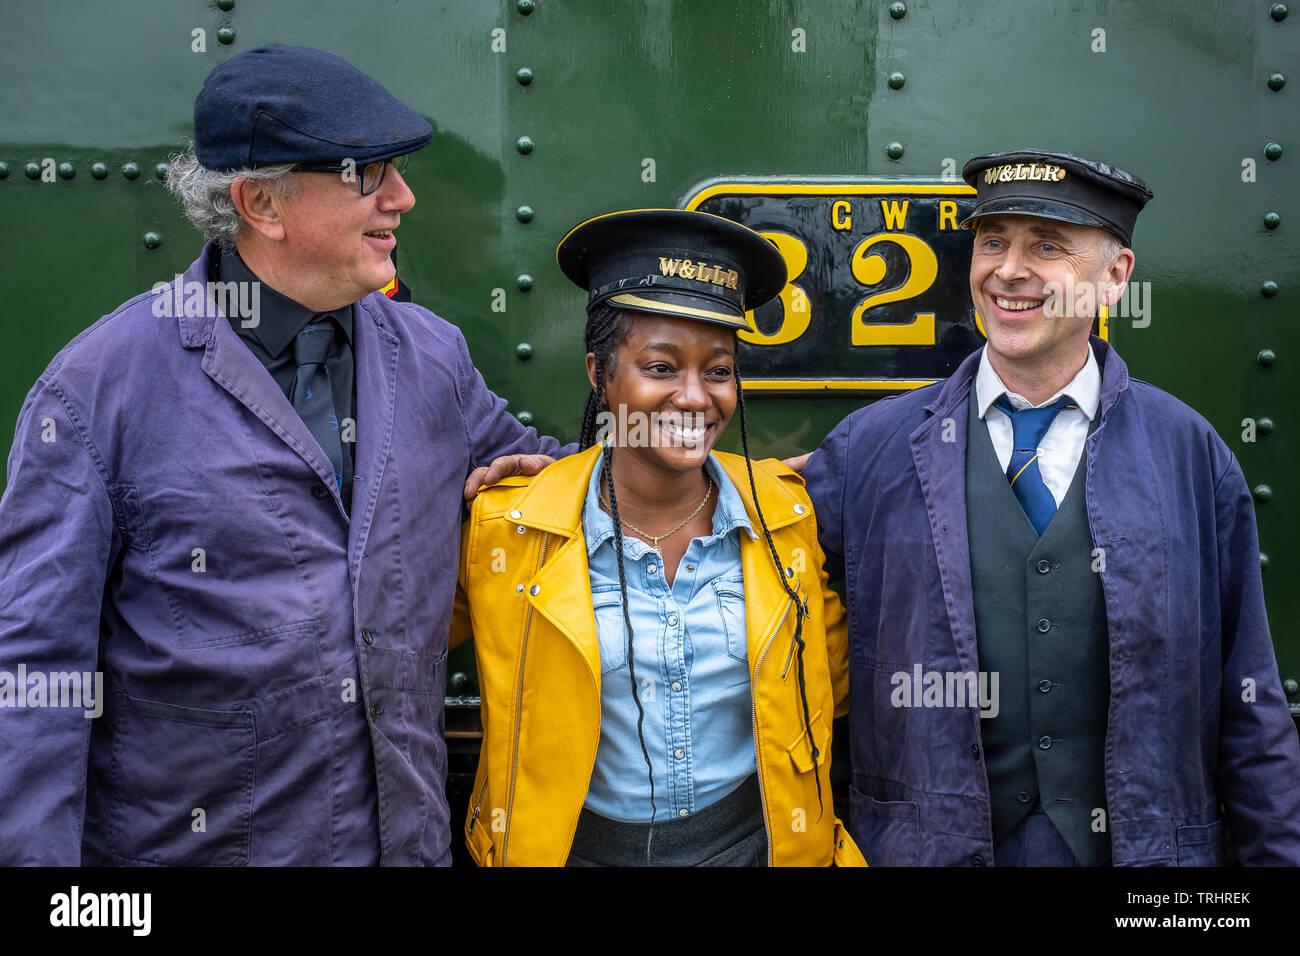 Tourist and workers, firemen, Llanfair and Welshpool Steam Railway, Wales Stock Photo